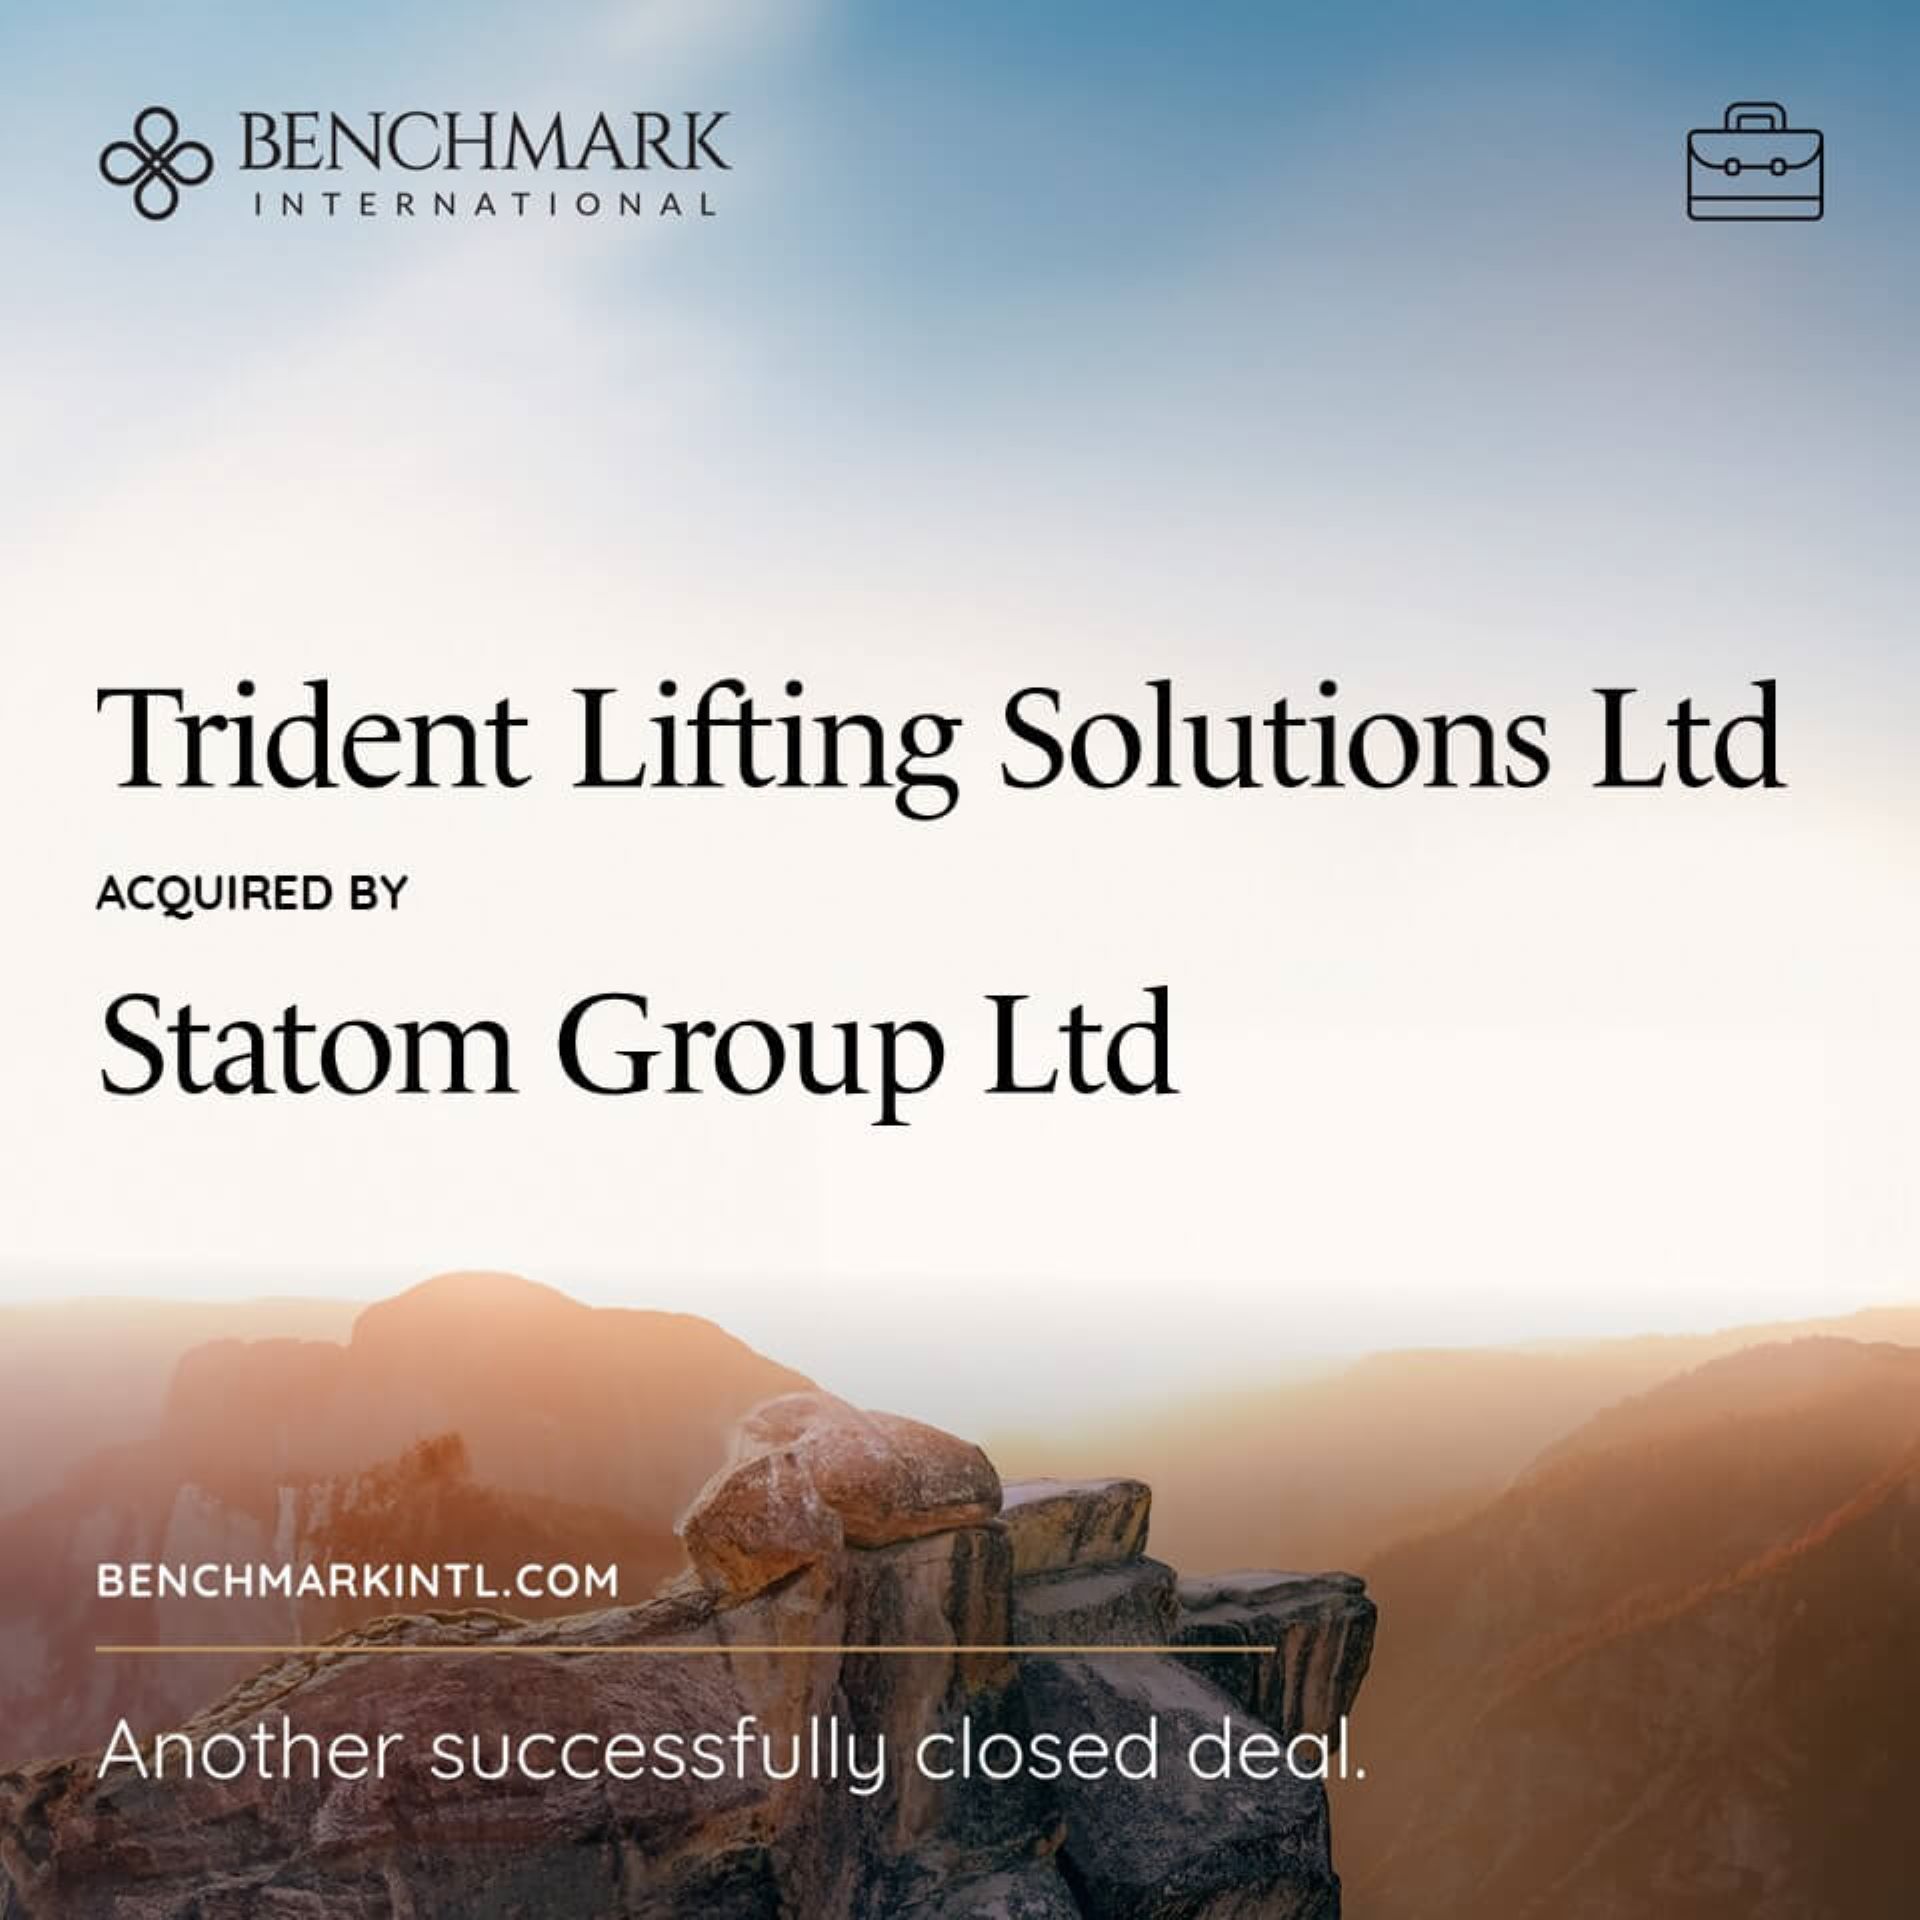 Trident acquired by Statom Group